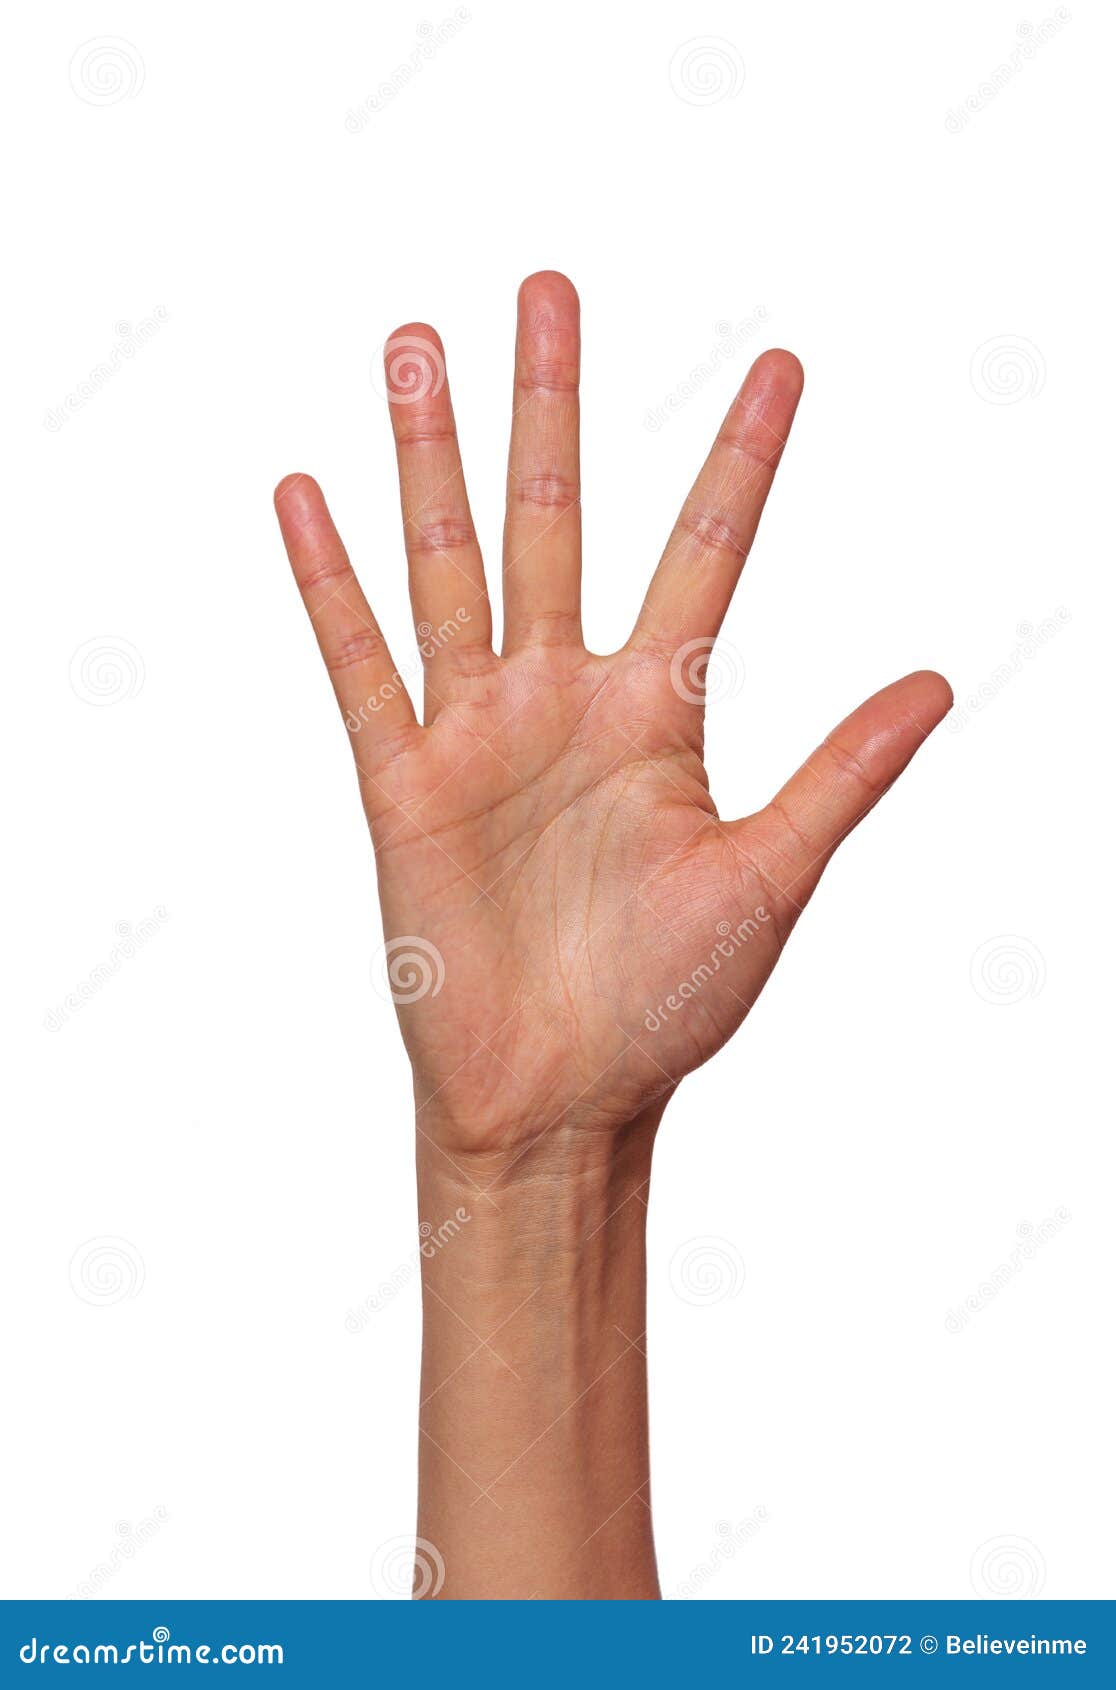 woman hand showing five fingers  on white